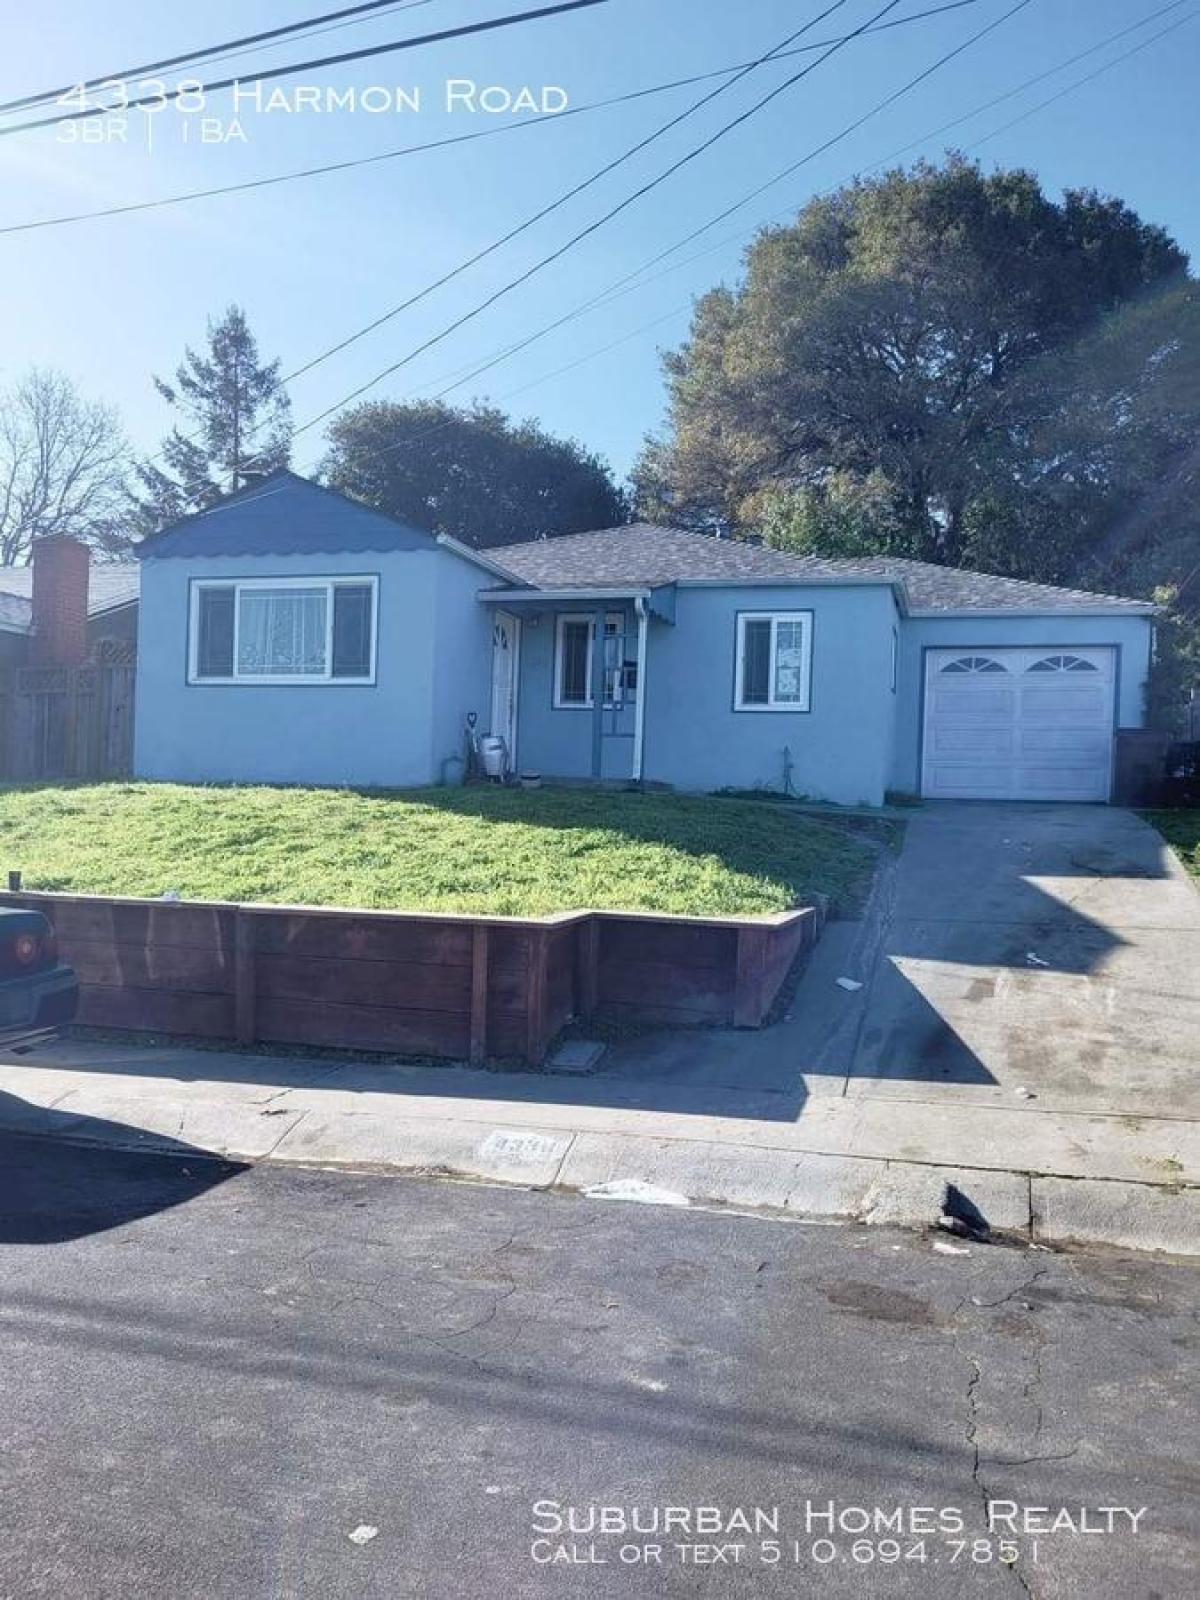 Picture of Home For Rent in El Sobrante, California, United States